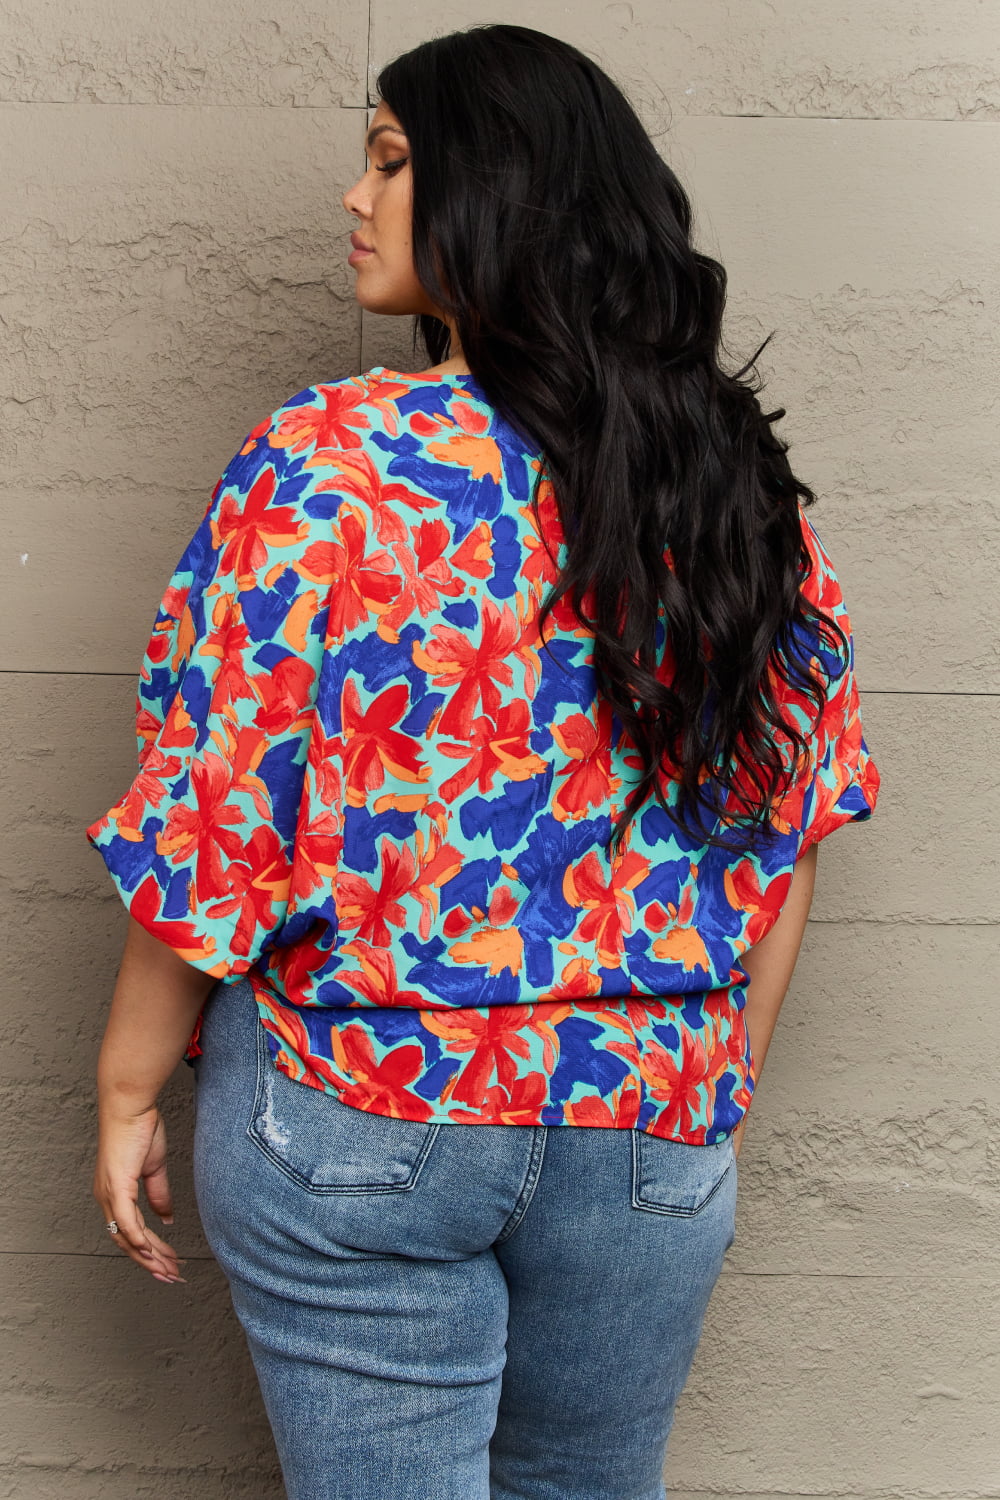 New Season Plus Size Floral Blouse - Women’s Clothing & Accessories - Shirts & Tops - 2 - 2024